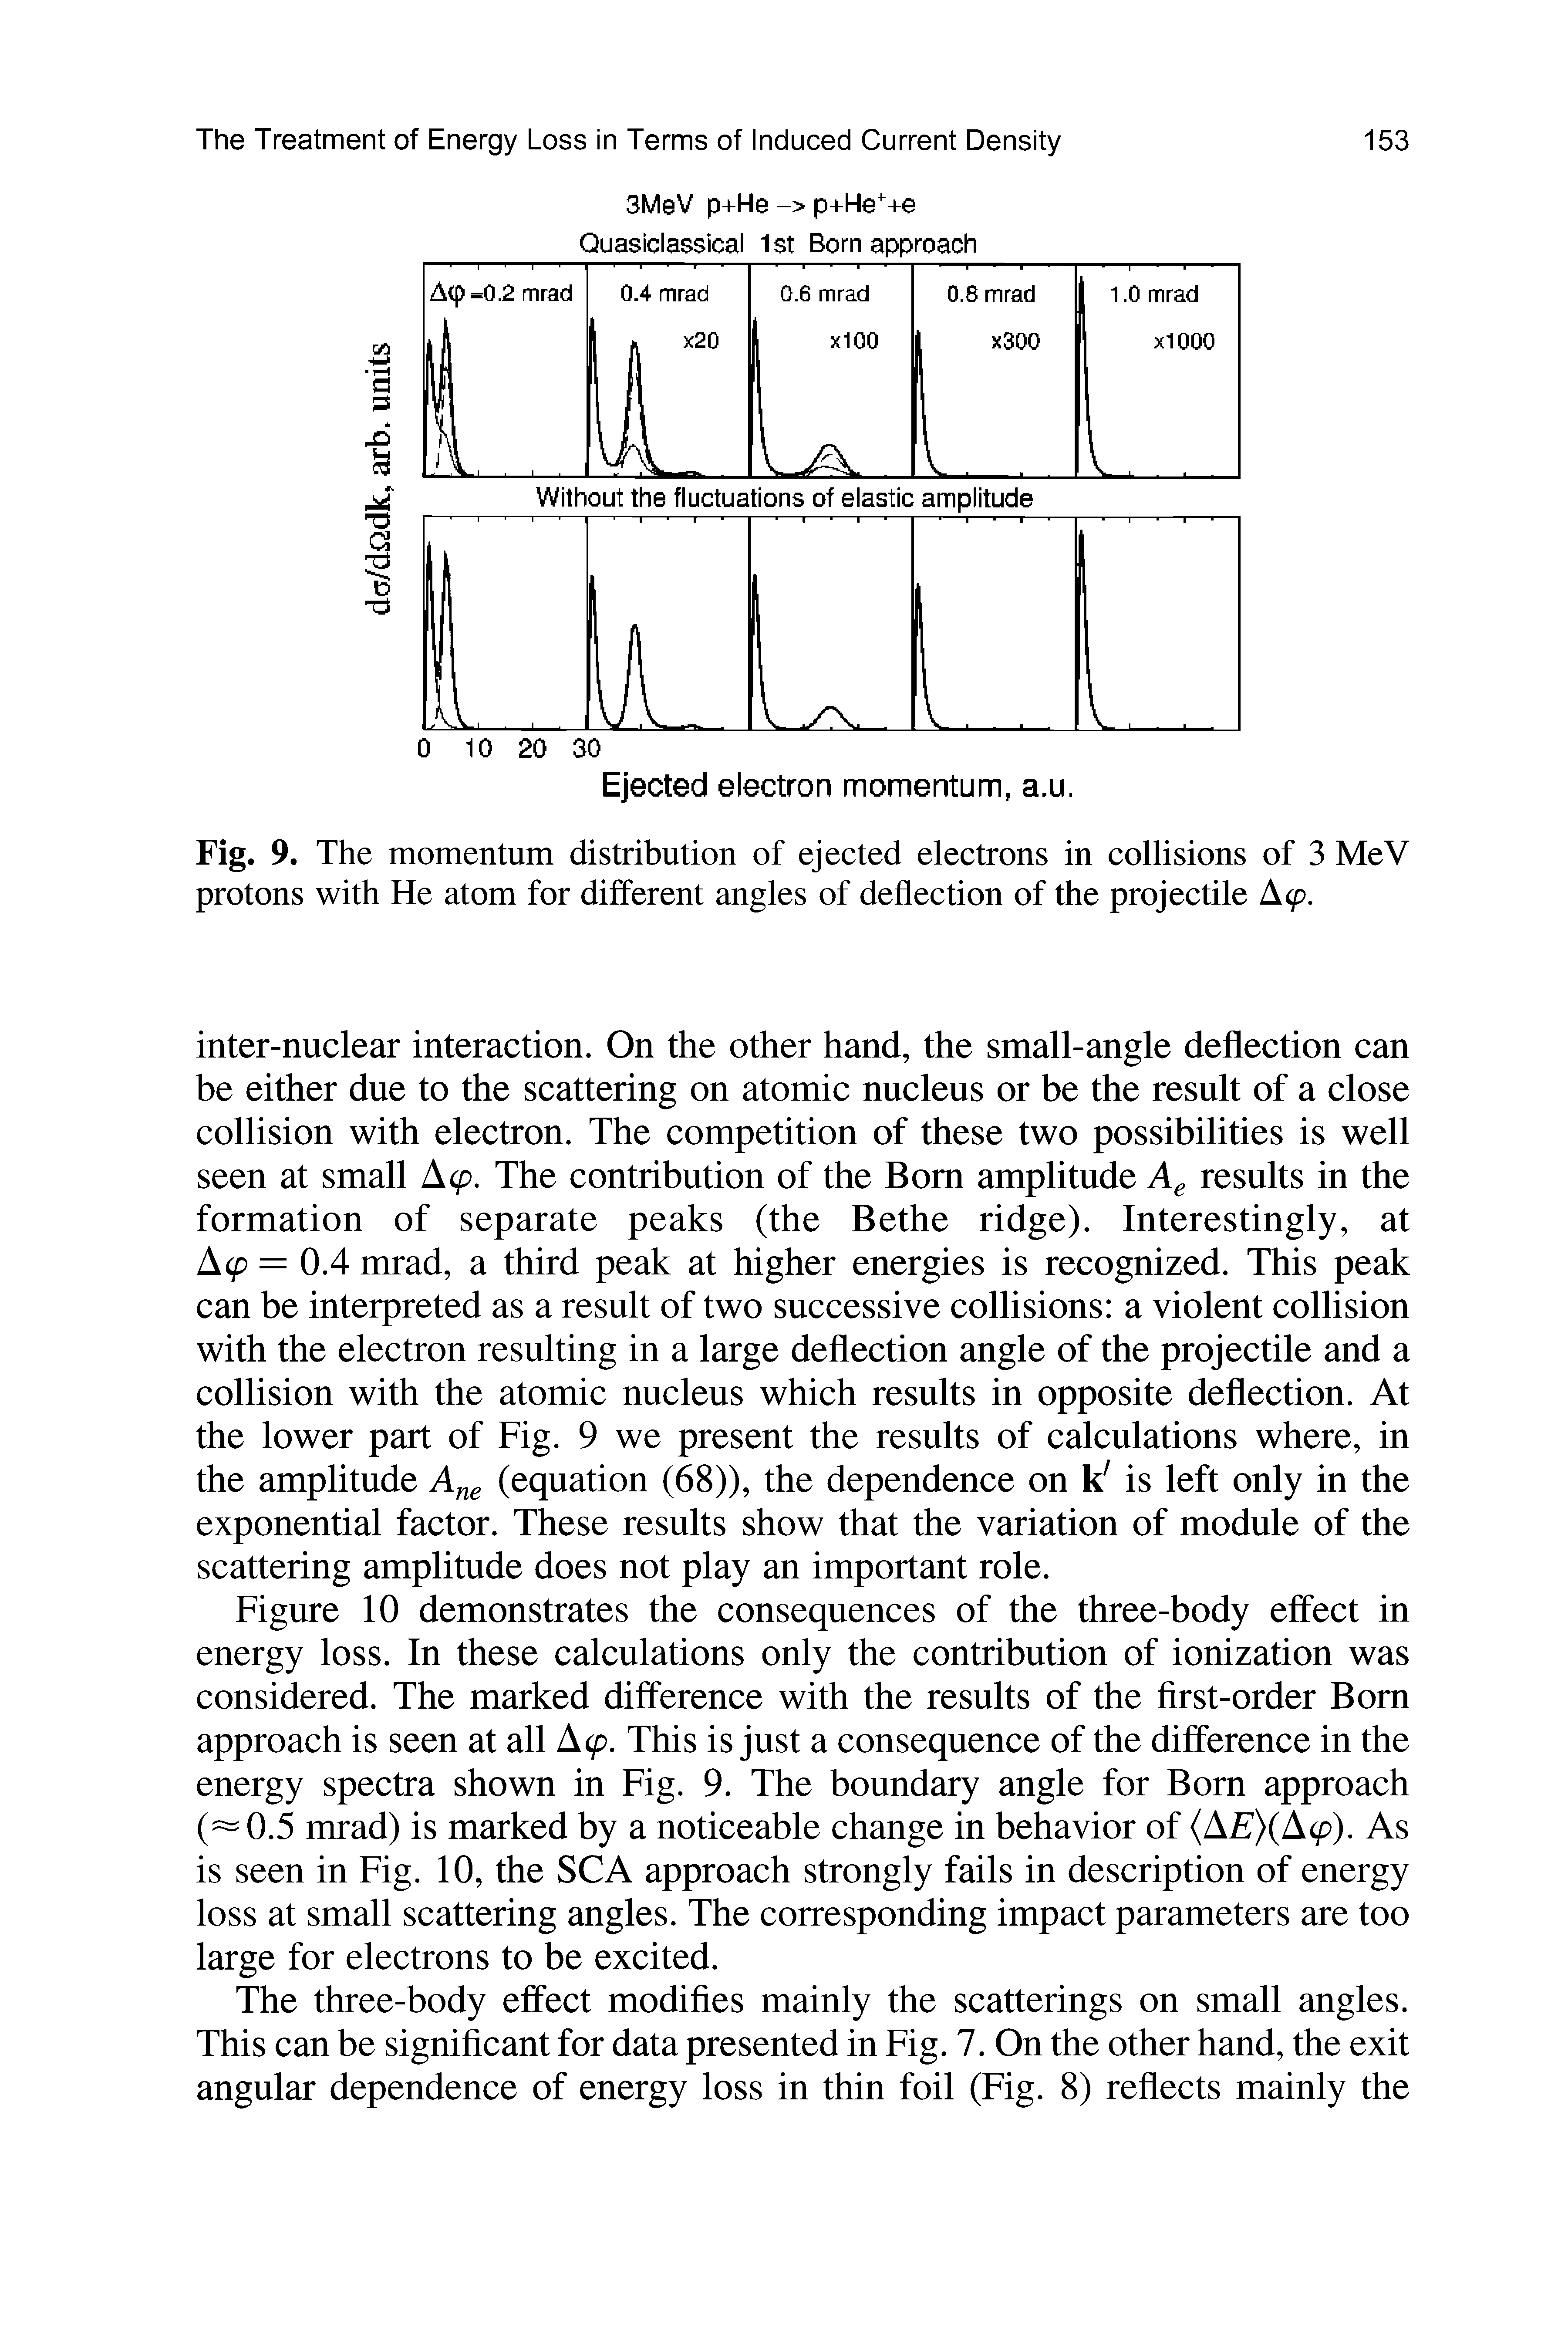 Fig. 9. The momentum distribution of ejected electrons in collisions of 3 MeV protons with He atom for different angles of deflection of the projectile...